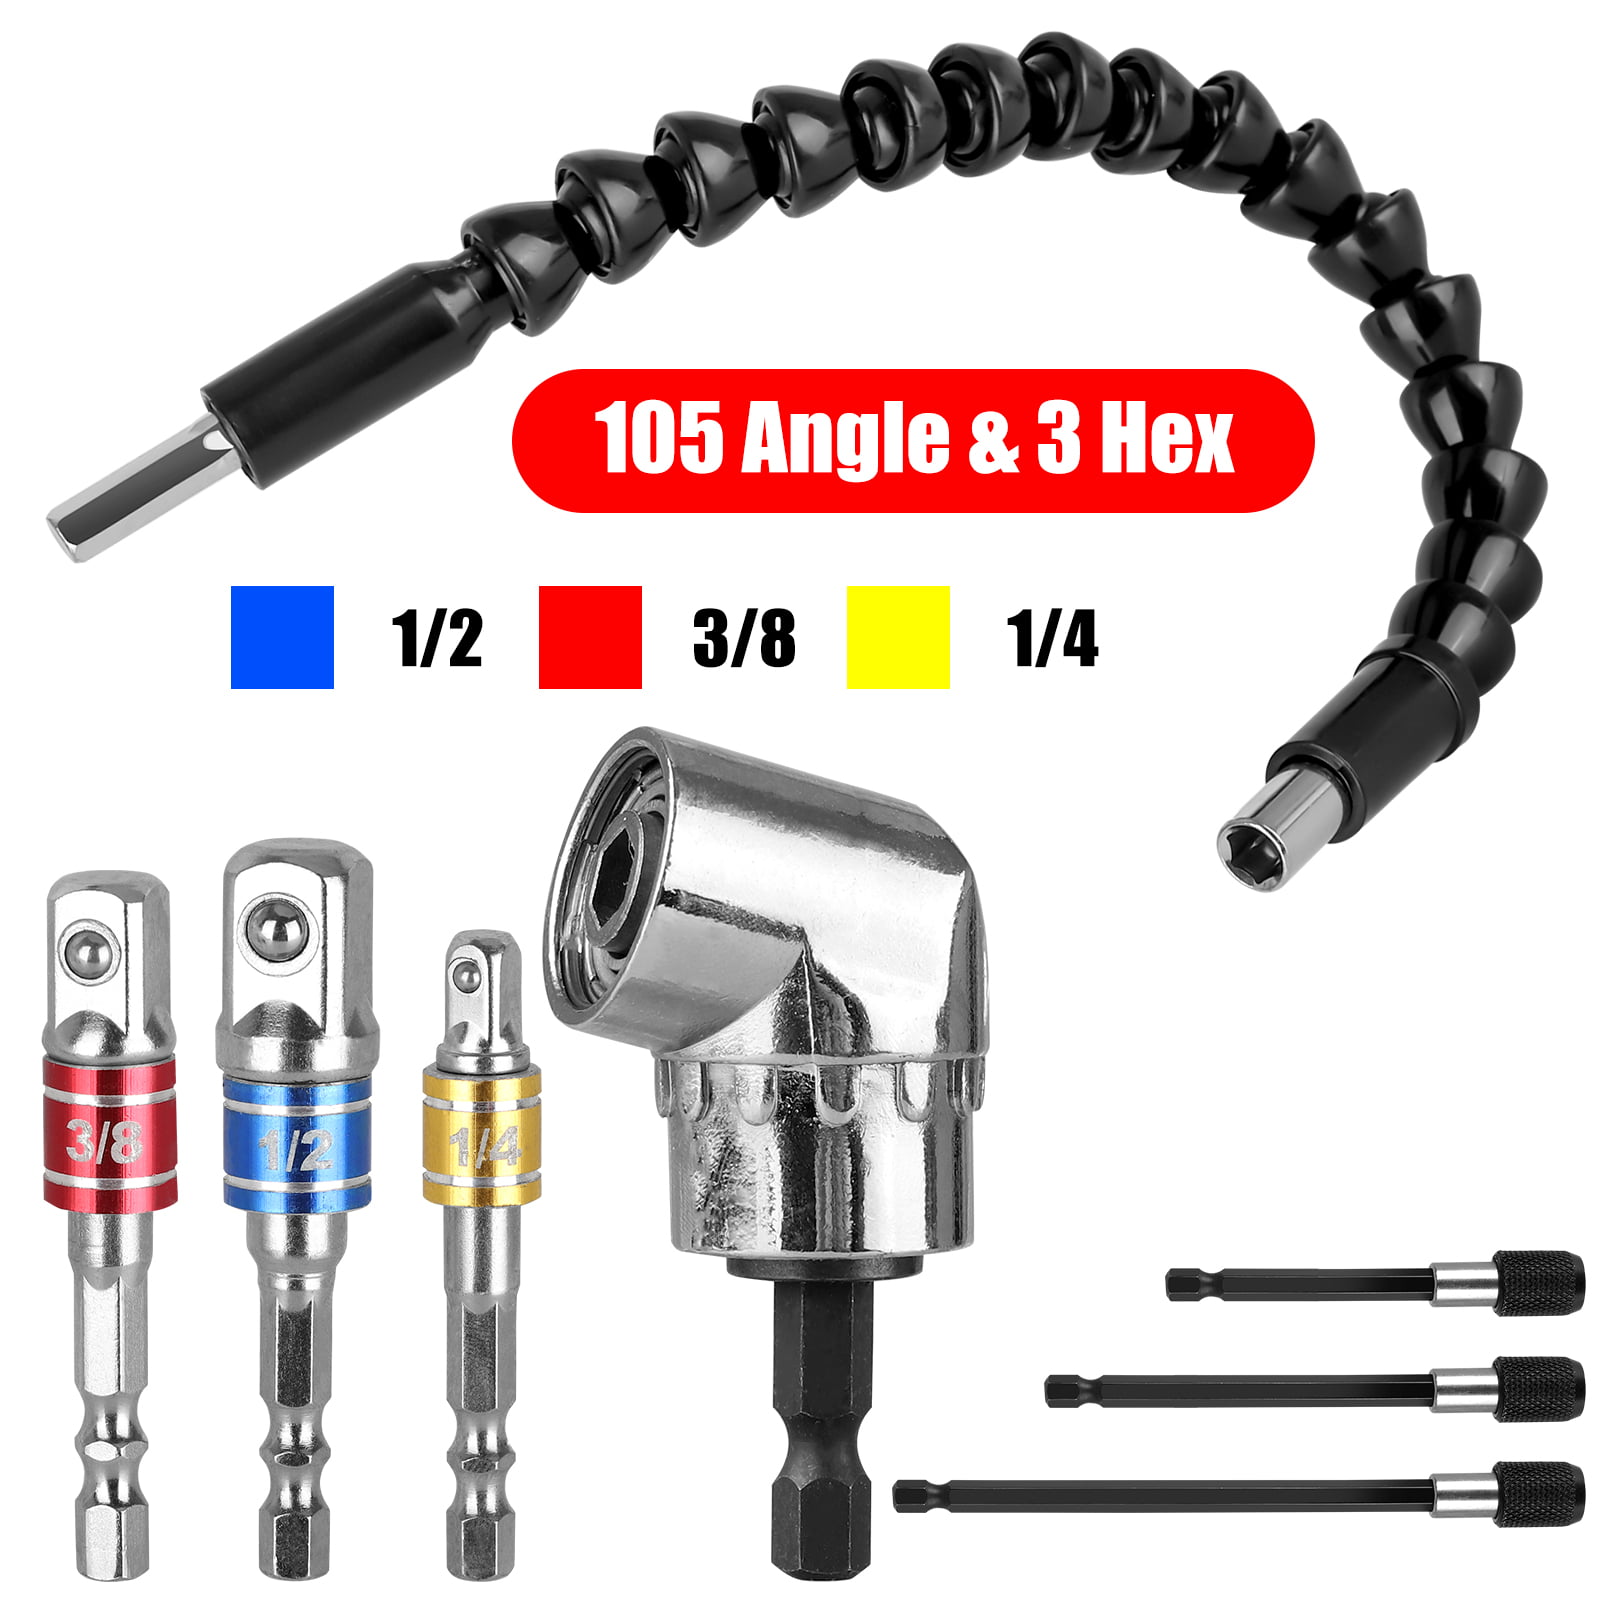 As Shown Drill Bits High Speed High Carbon Steel Extension Set Socket Adapter Nut Driver Drill Supplies for Electric Drill 3 Pcs